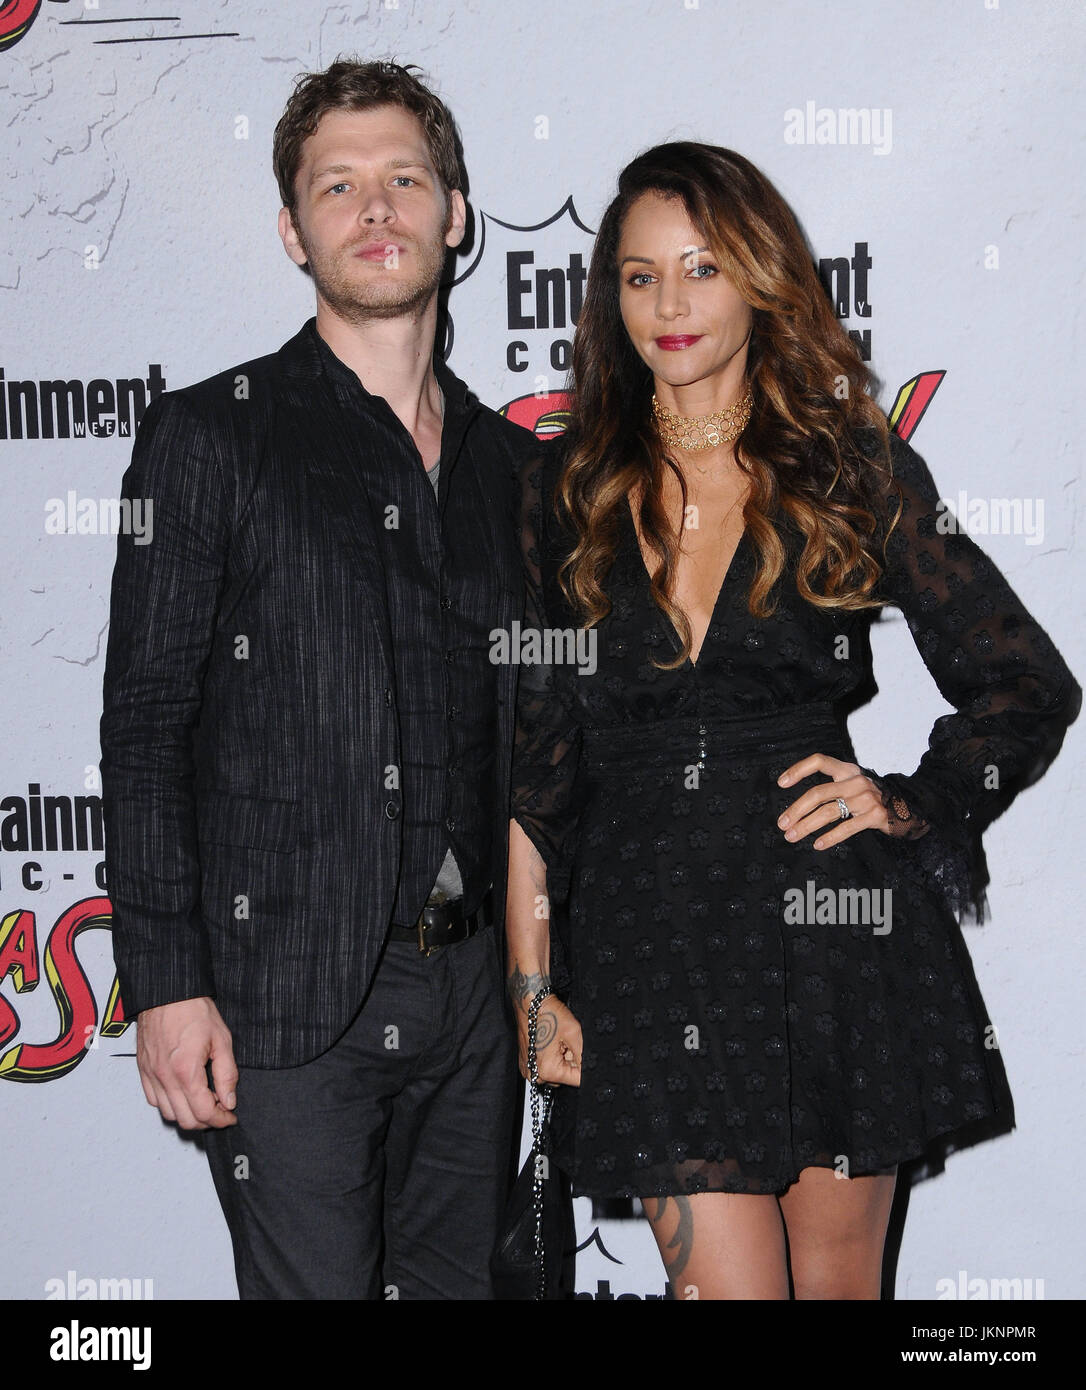 Who Is Joseph Morgan's Wife, Persia White? They Met on 'The